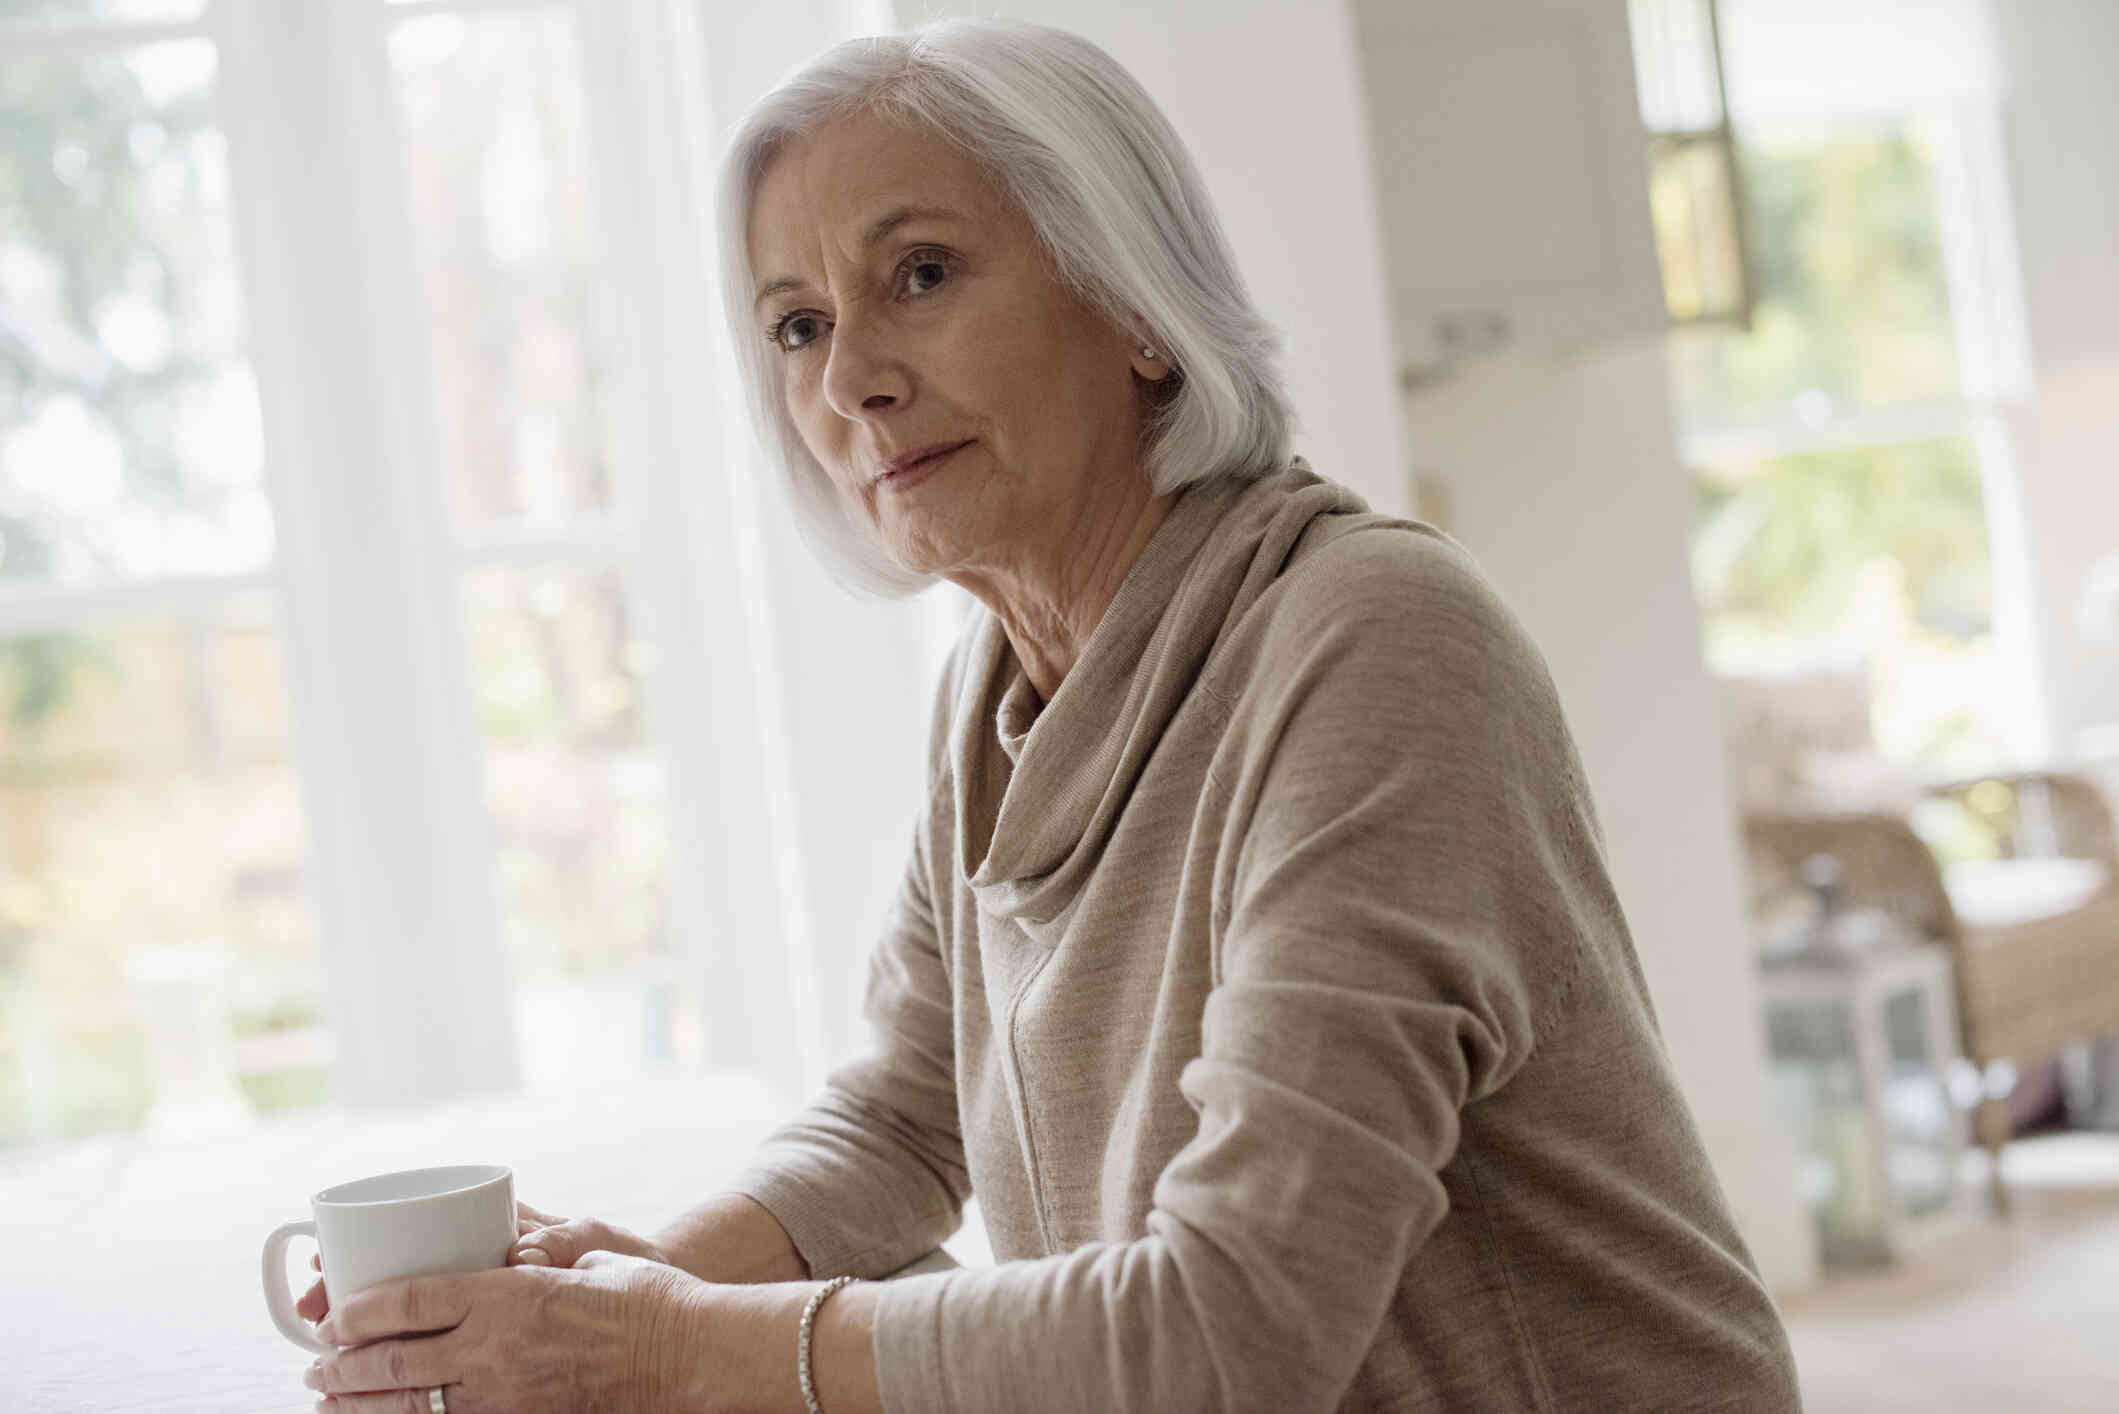 A middle aged woman in a tan sweater sits in her home and holds a white coffee mug while gazing off with a serious expression.